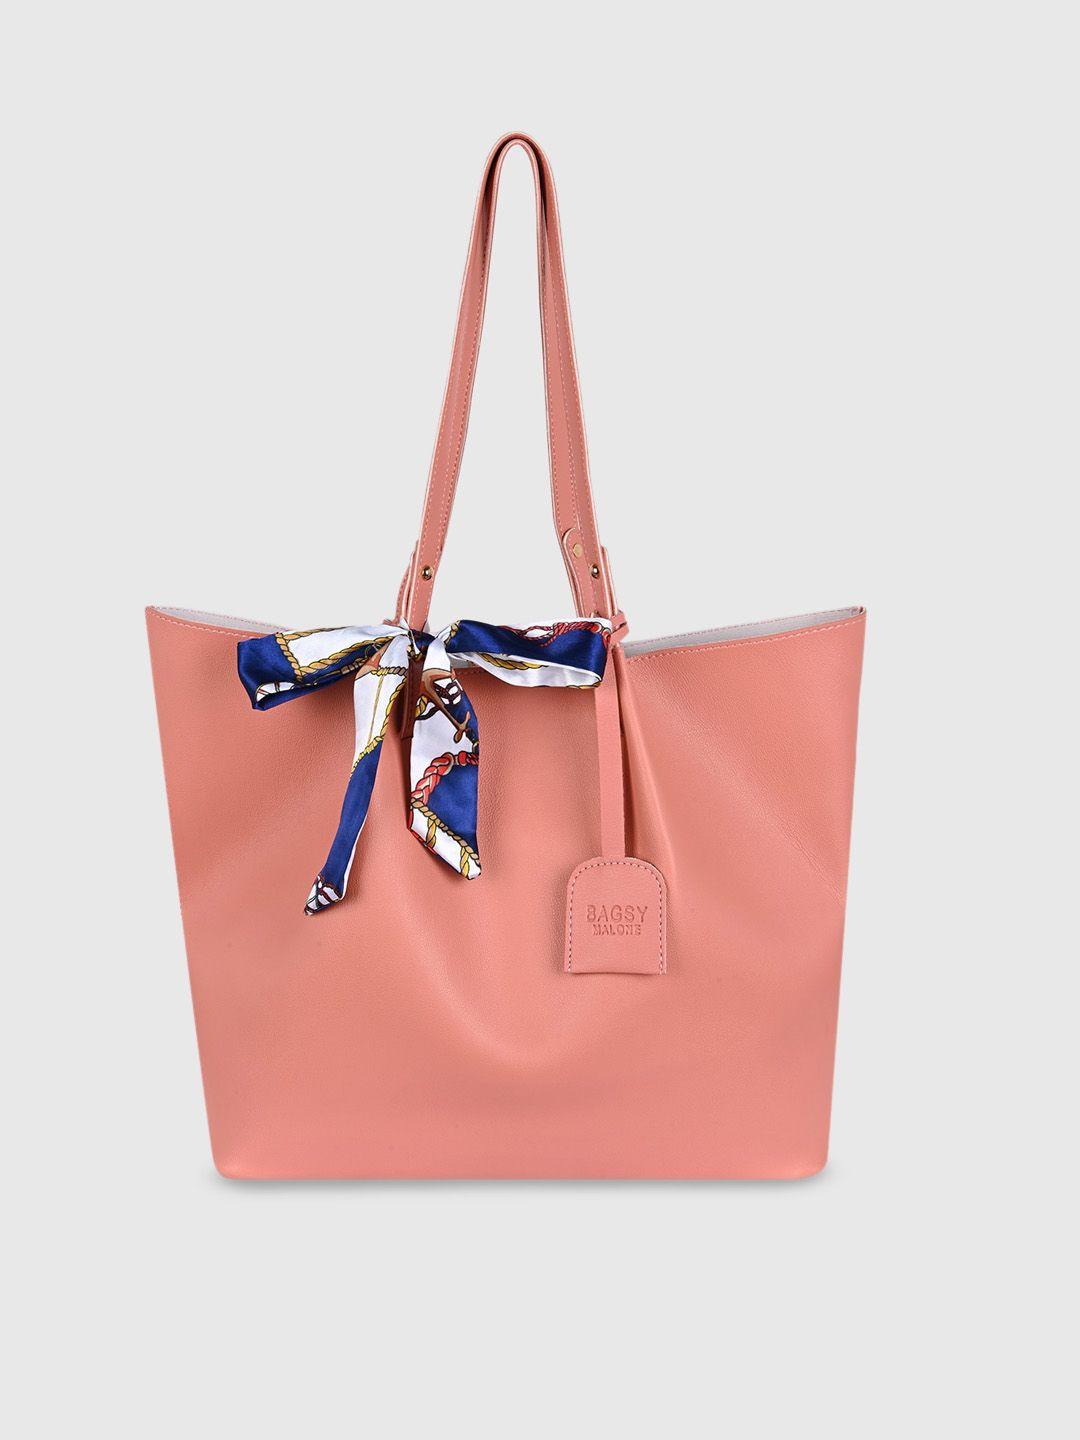 bagsy malone peach-coloured pu structured tote bag with bow detail